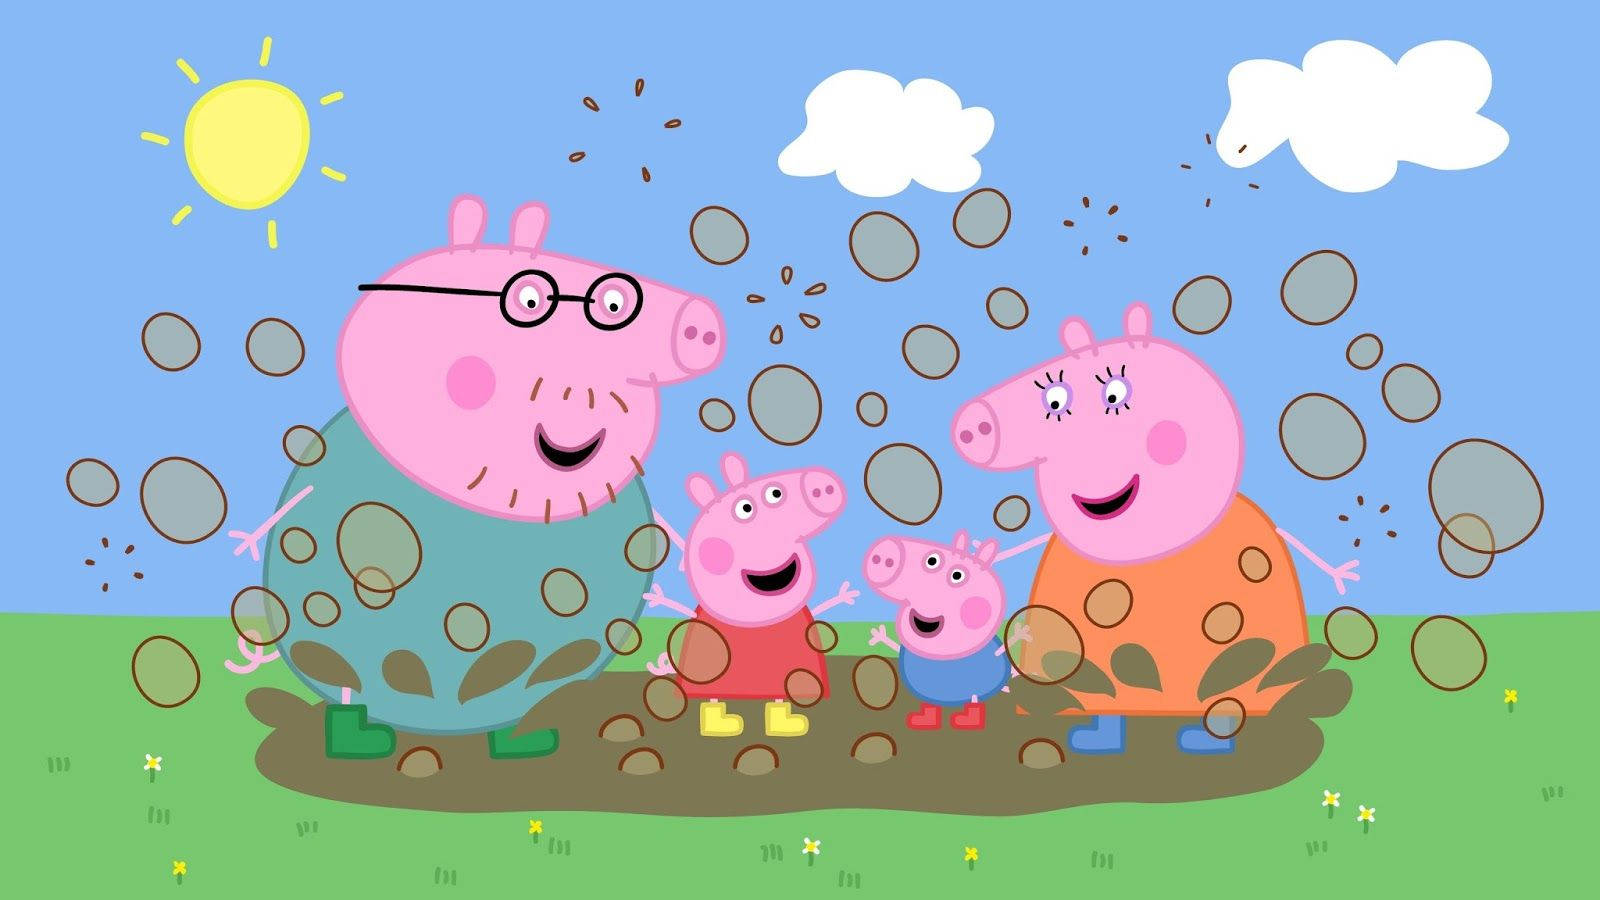 Peppa Pig family playing in the mud puddles wallpaper.